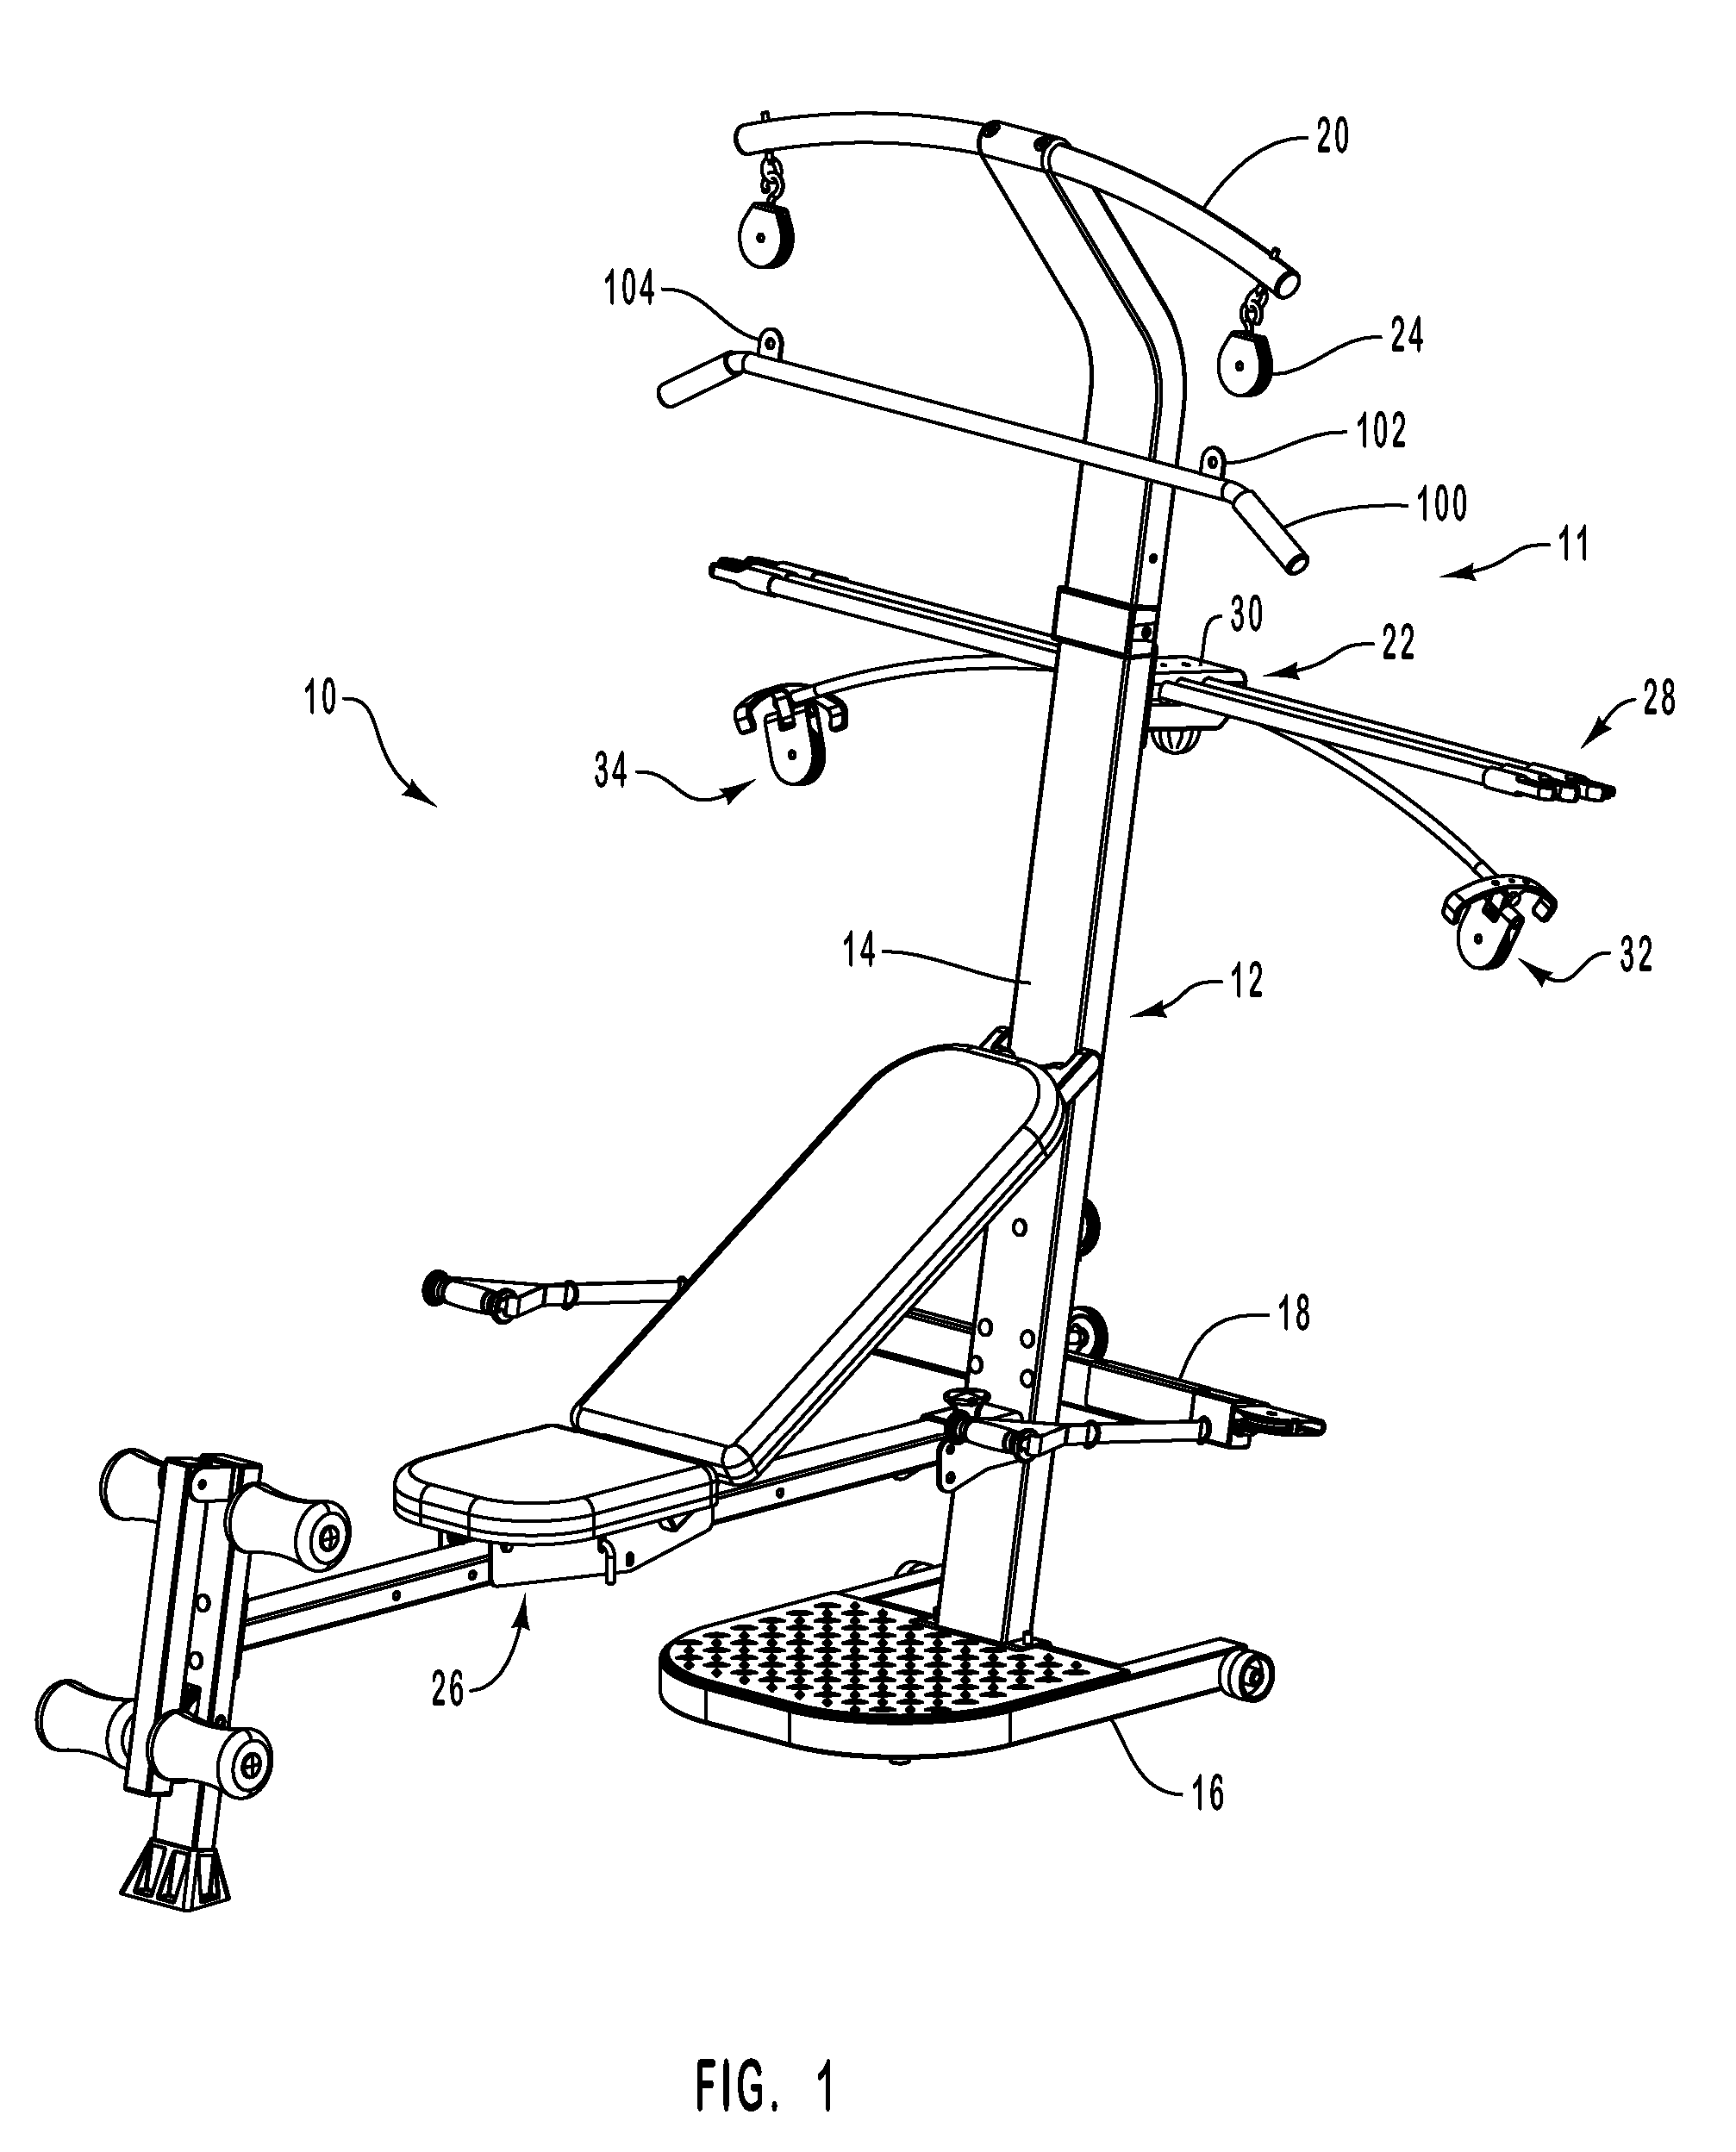 Exercise device with centrally mounted resistance rod